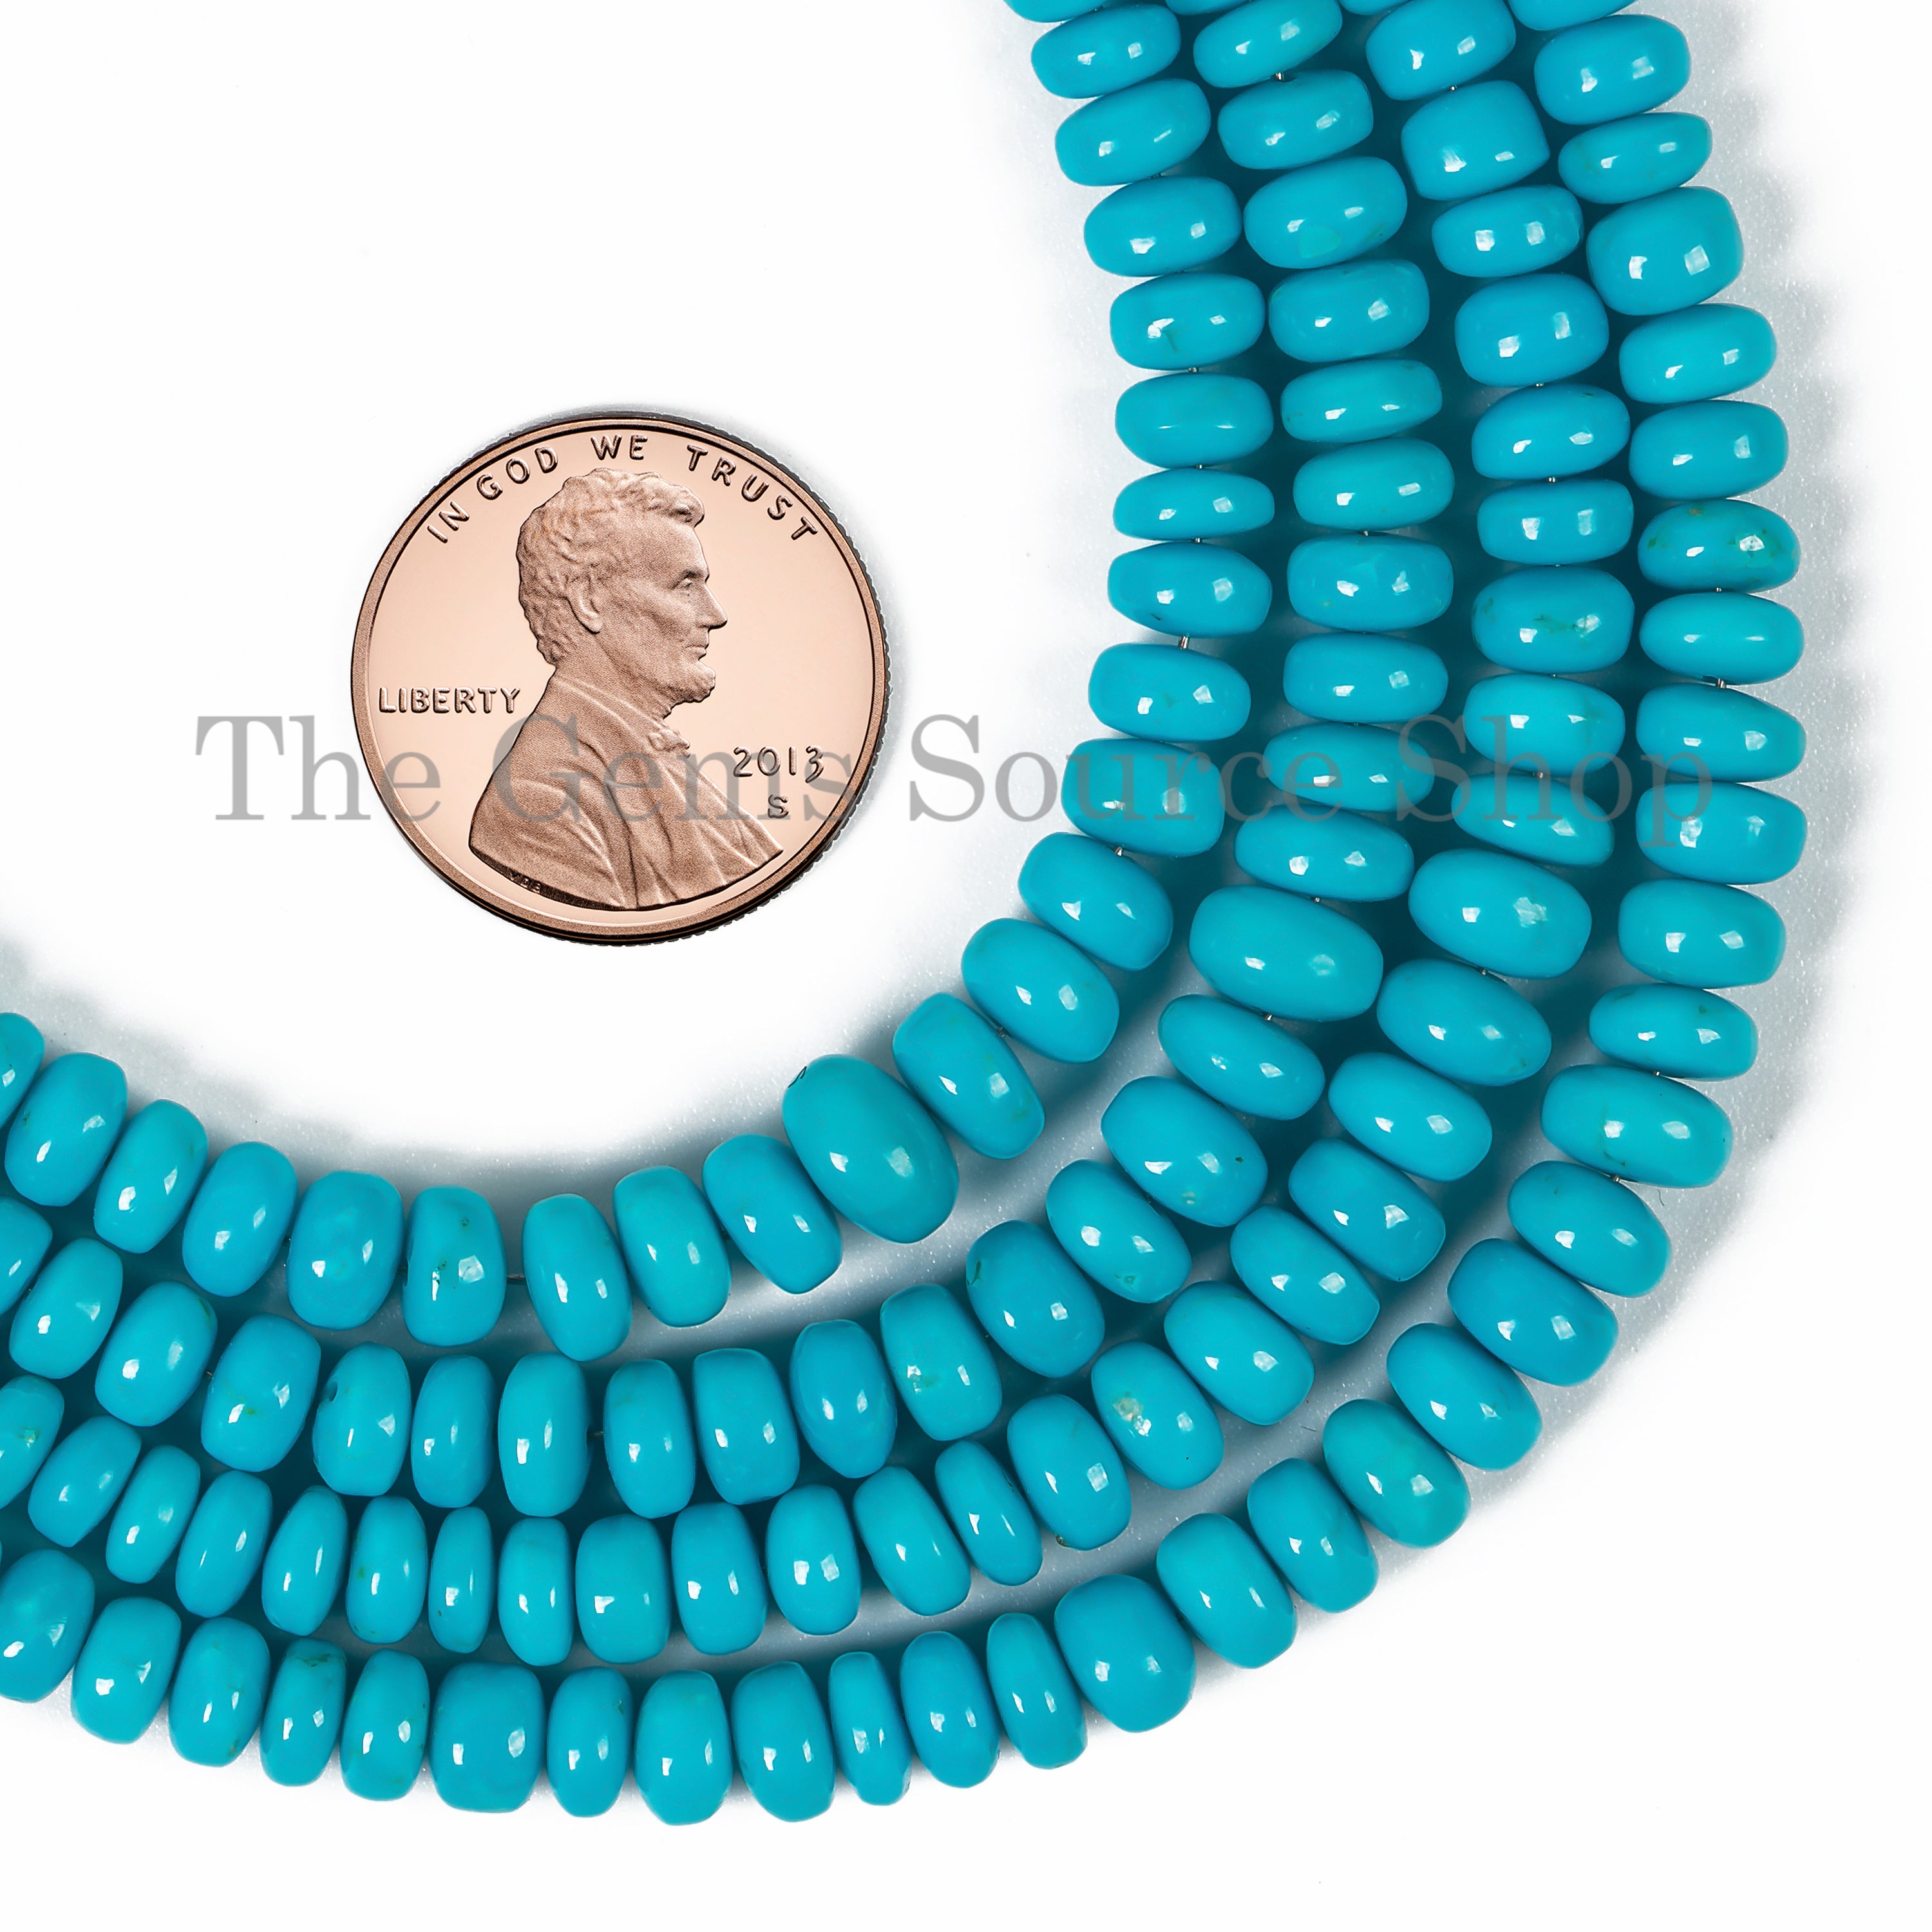 4-5.5mm Natural Sleeping Beauty Turquoise Plain Rondelle Beads TGS-4534